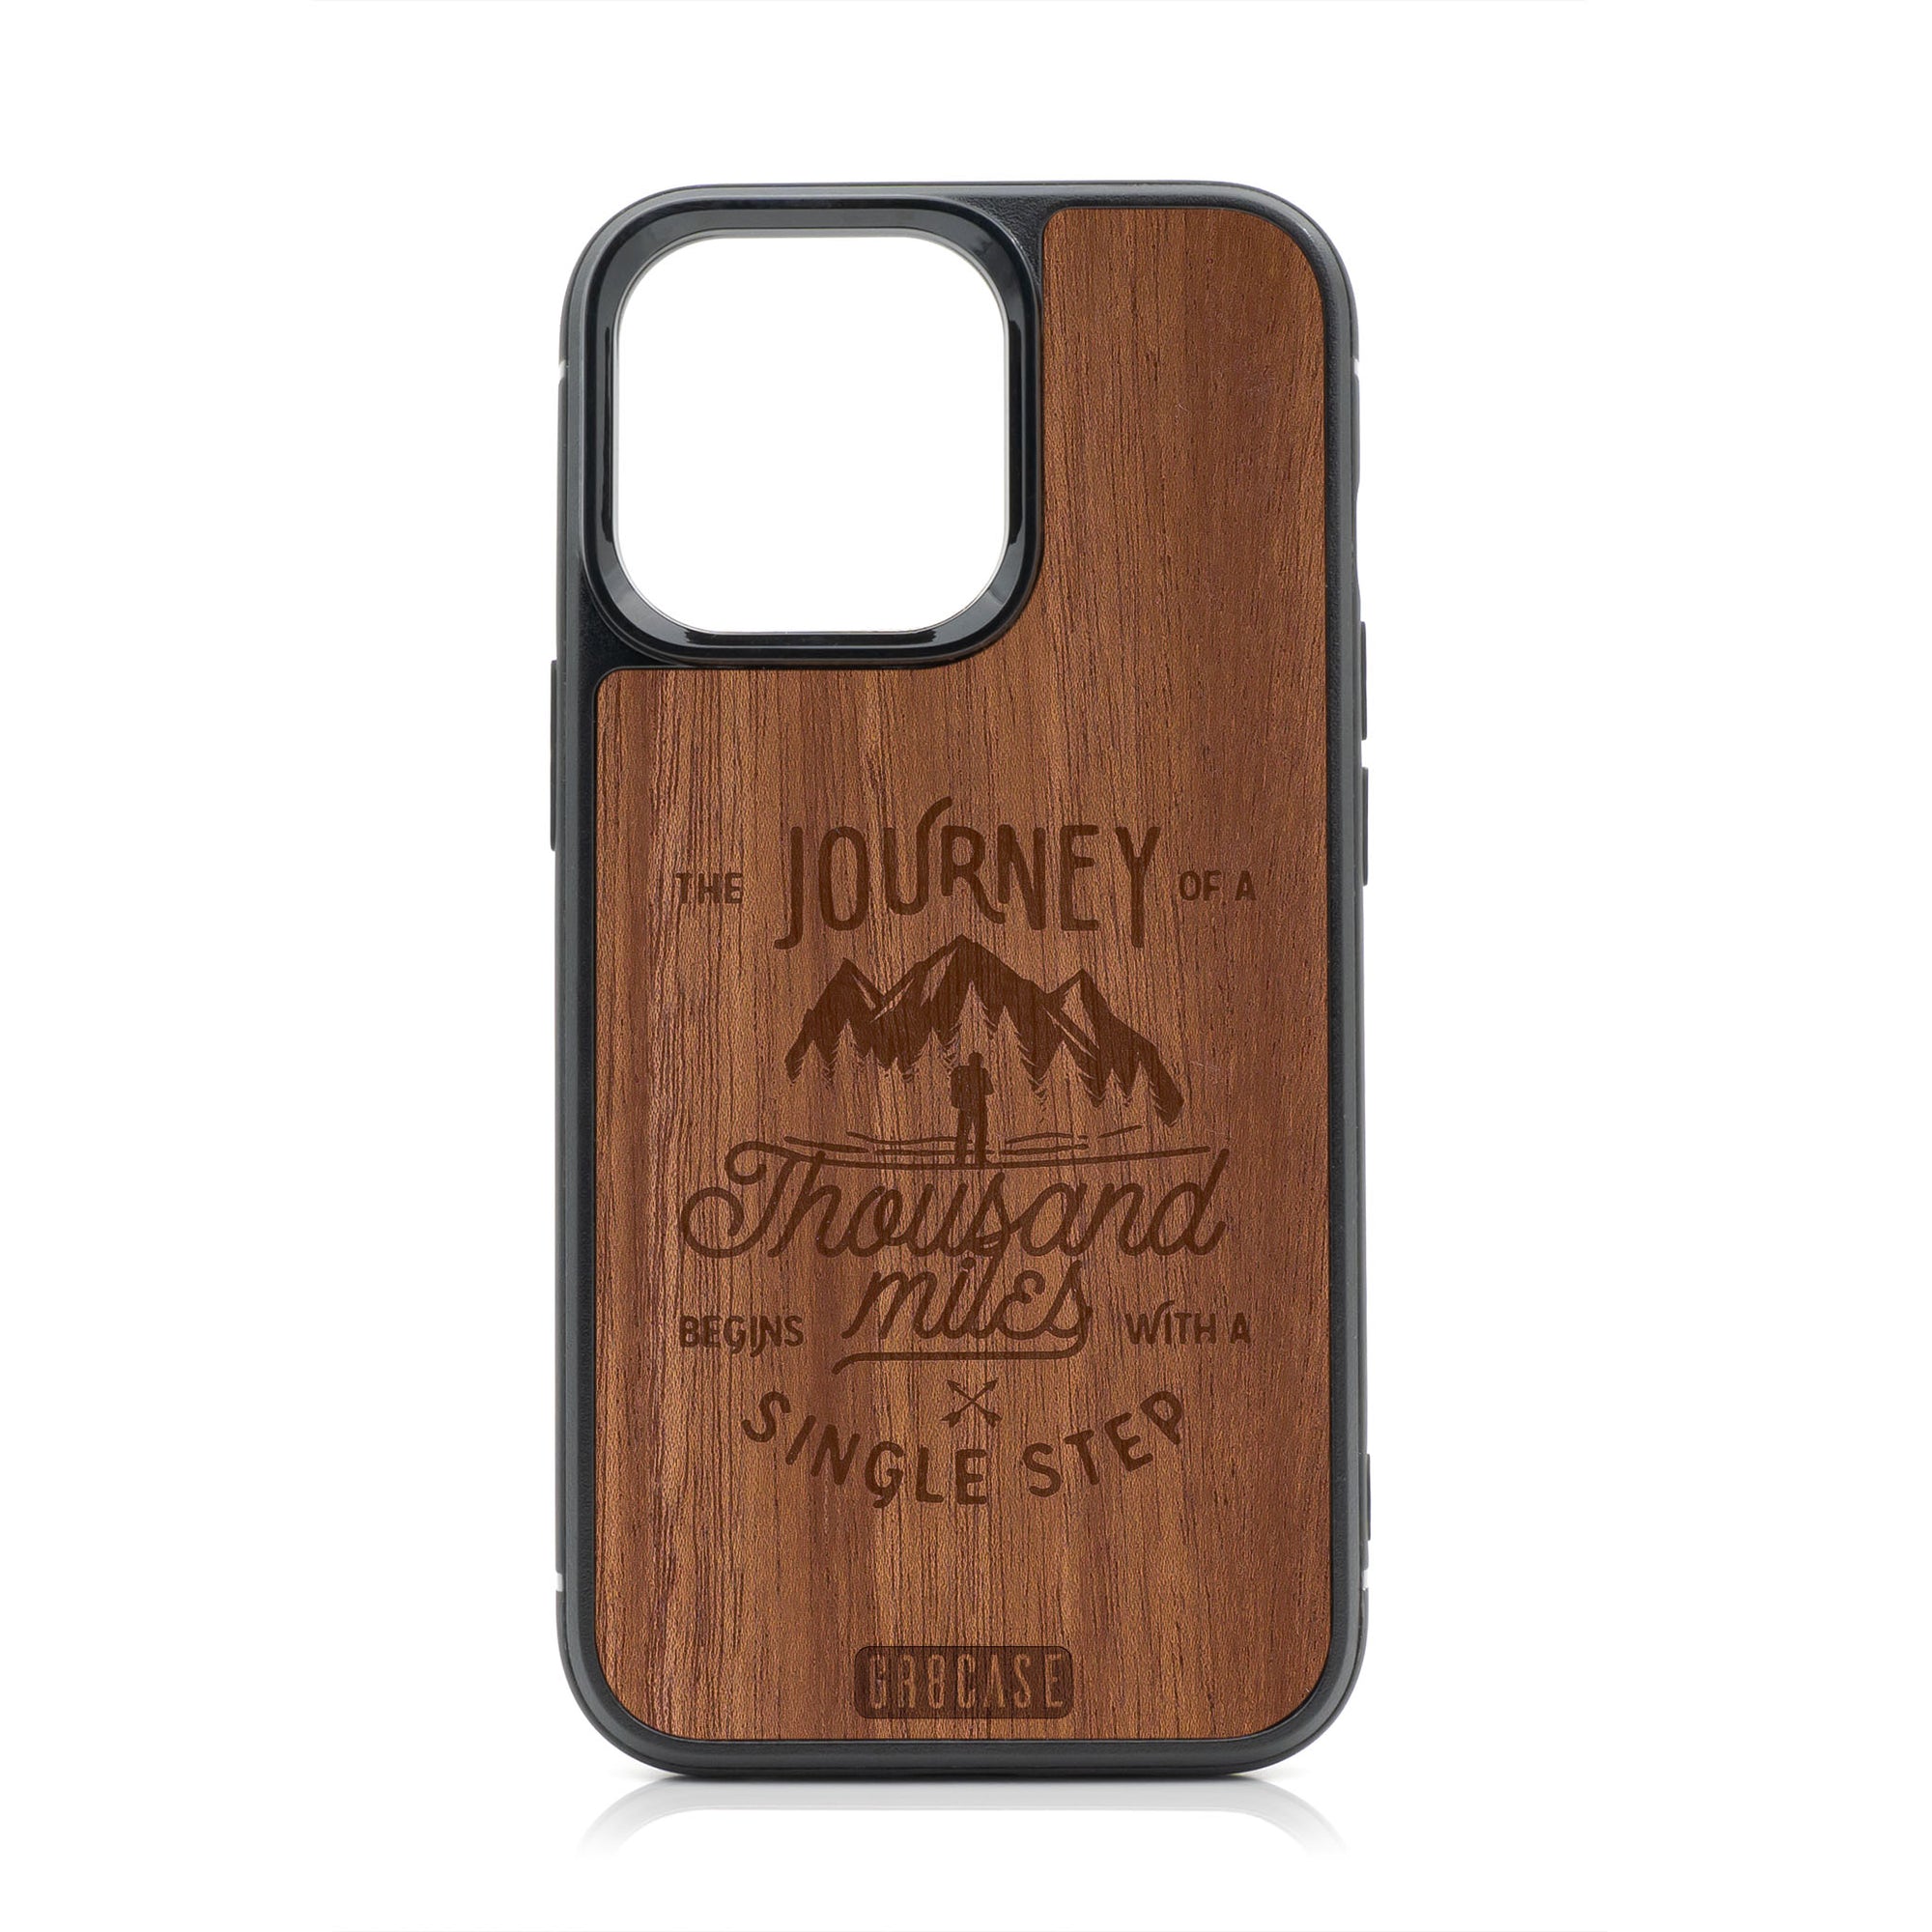 The Journey of A Thousand Miles Begins With A Single Step Design Wood Case For iPhone 13 Pro